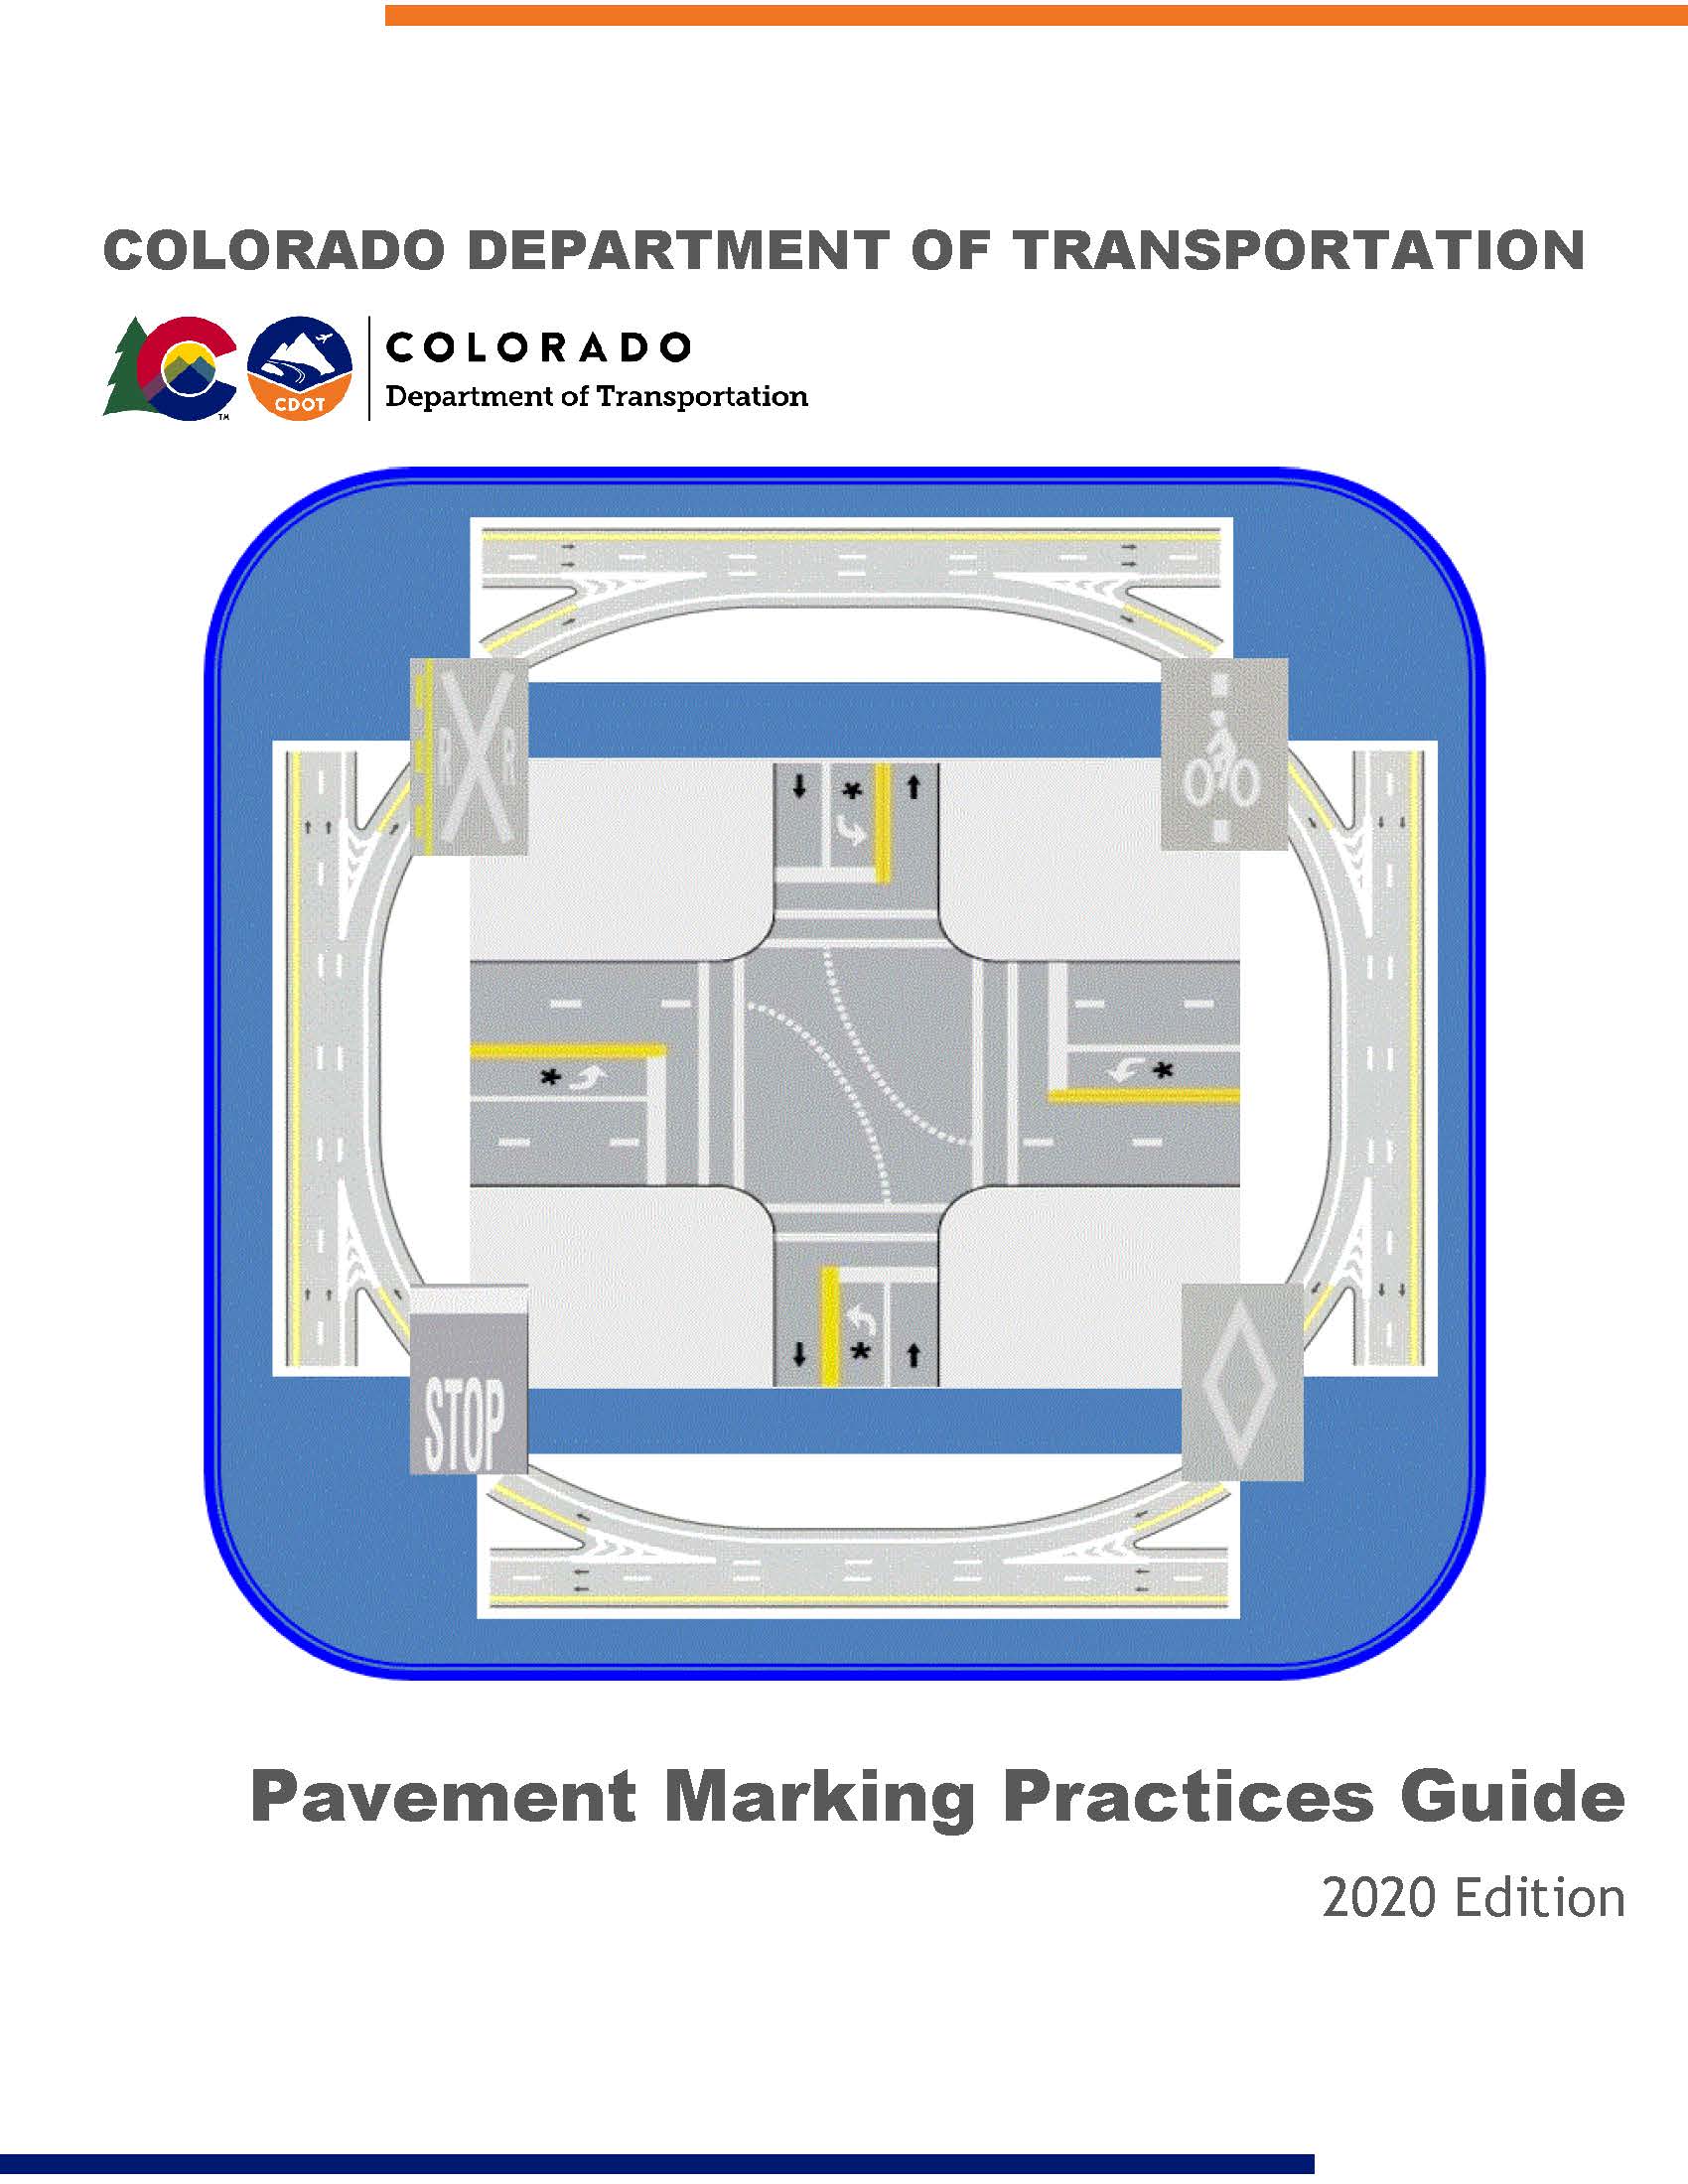 Pavement Marking Practices detail image